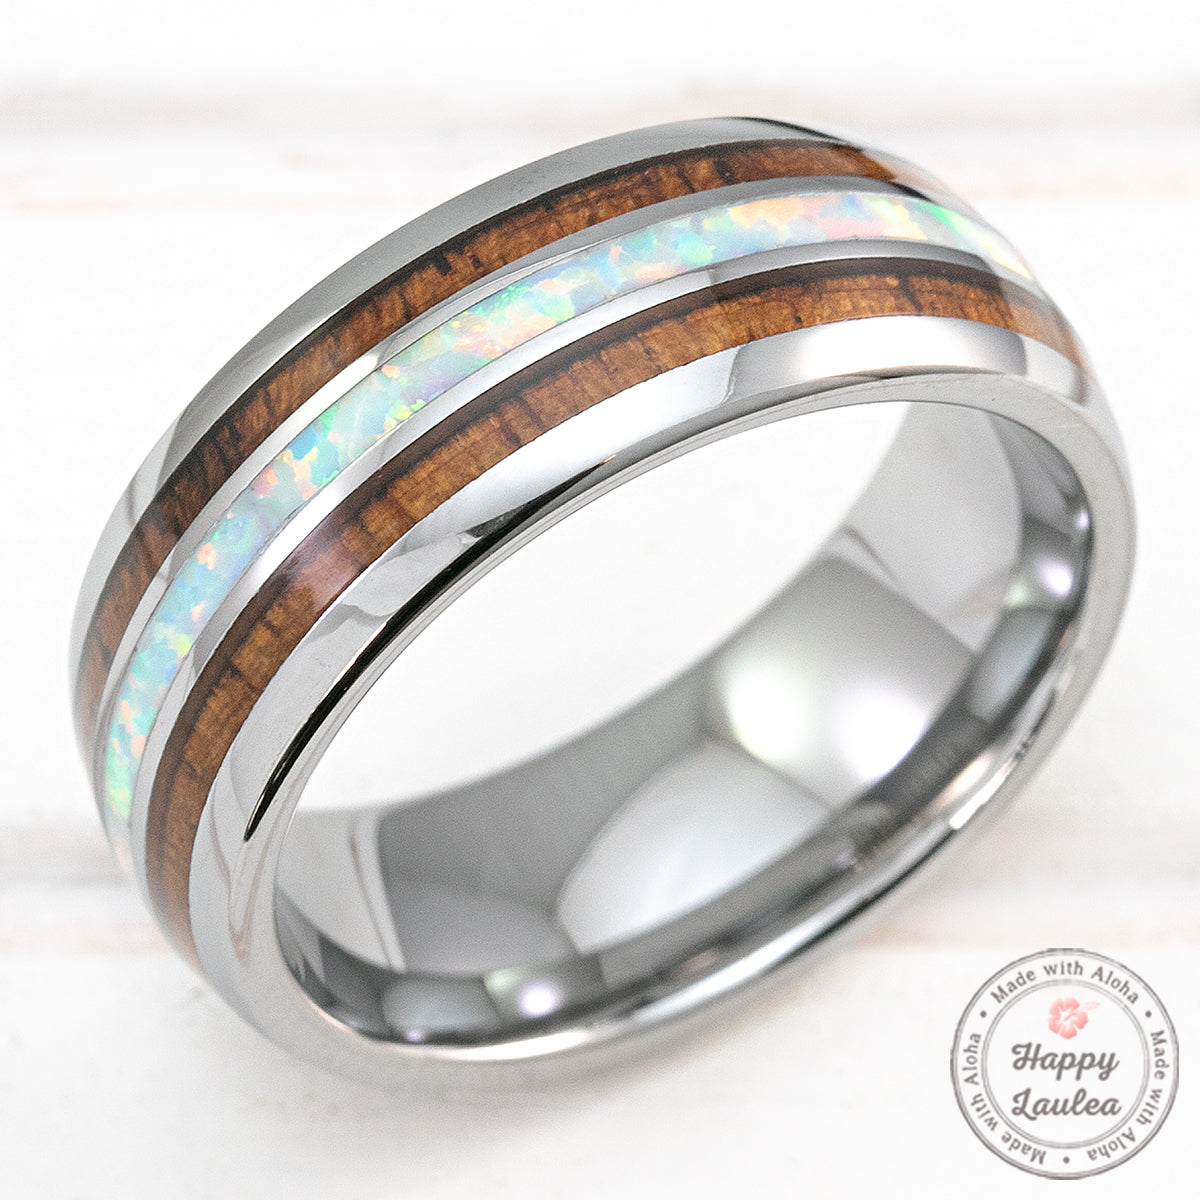 Tungsten Carbide 8mm Ring with Hawaiian Koa Wood & White Opal Tri-Inlay - Dome Shape, Comfort Fitment